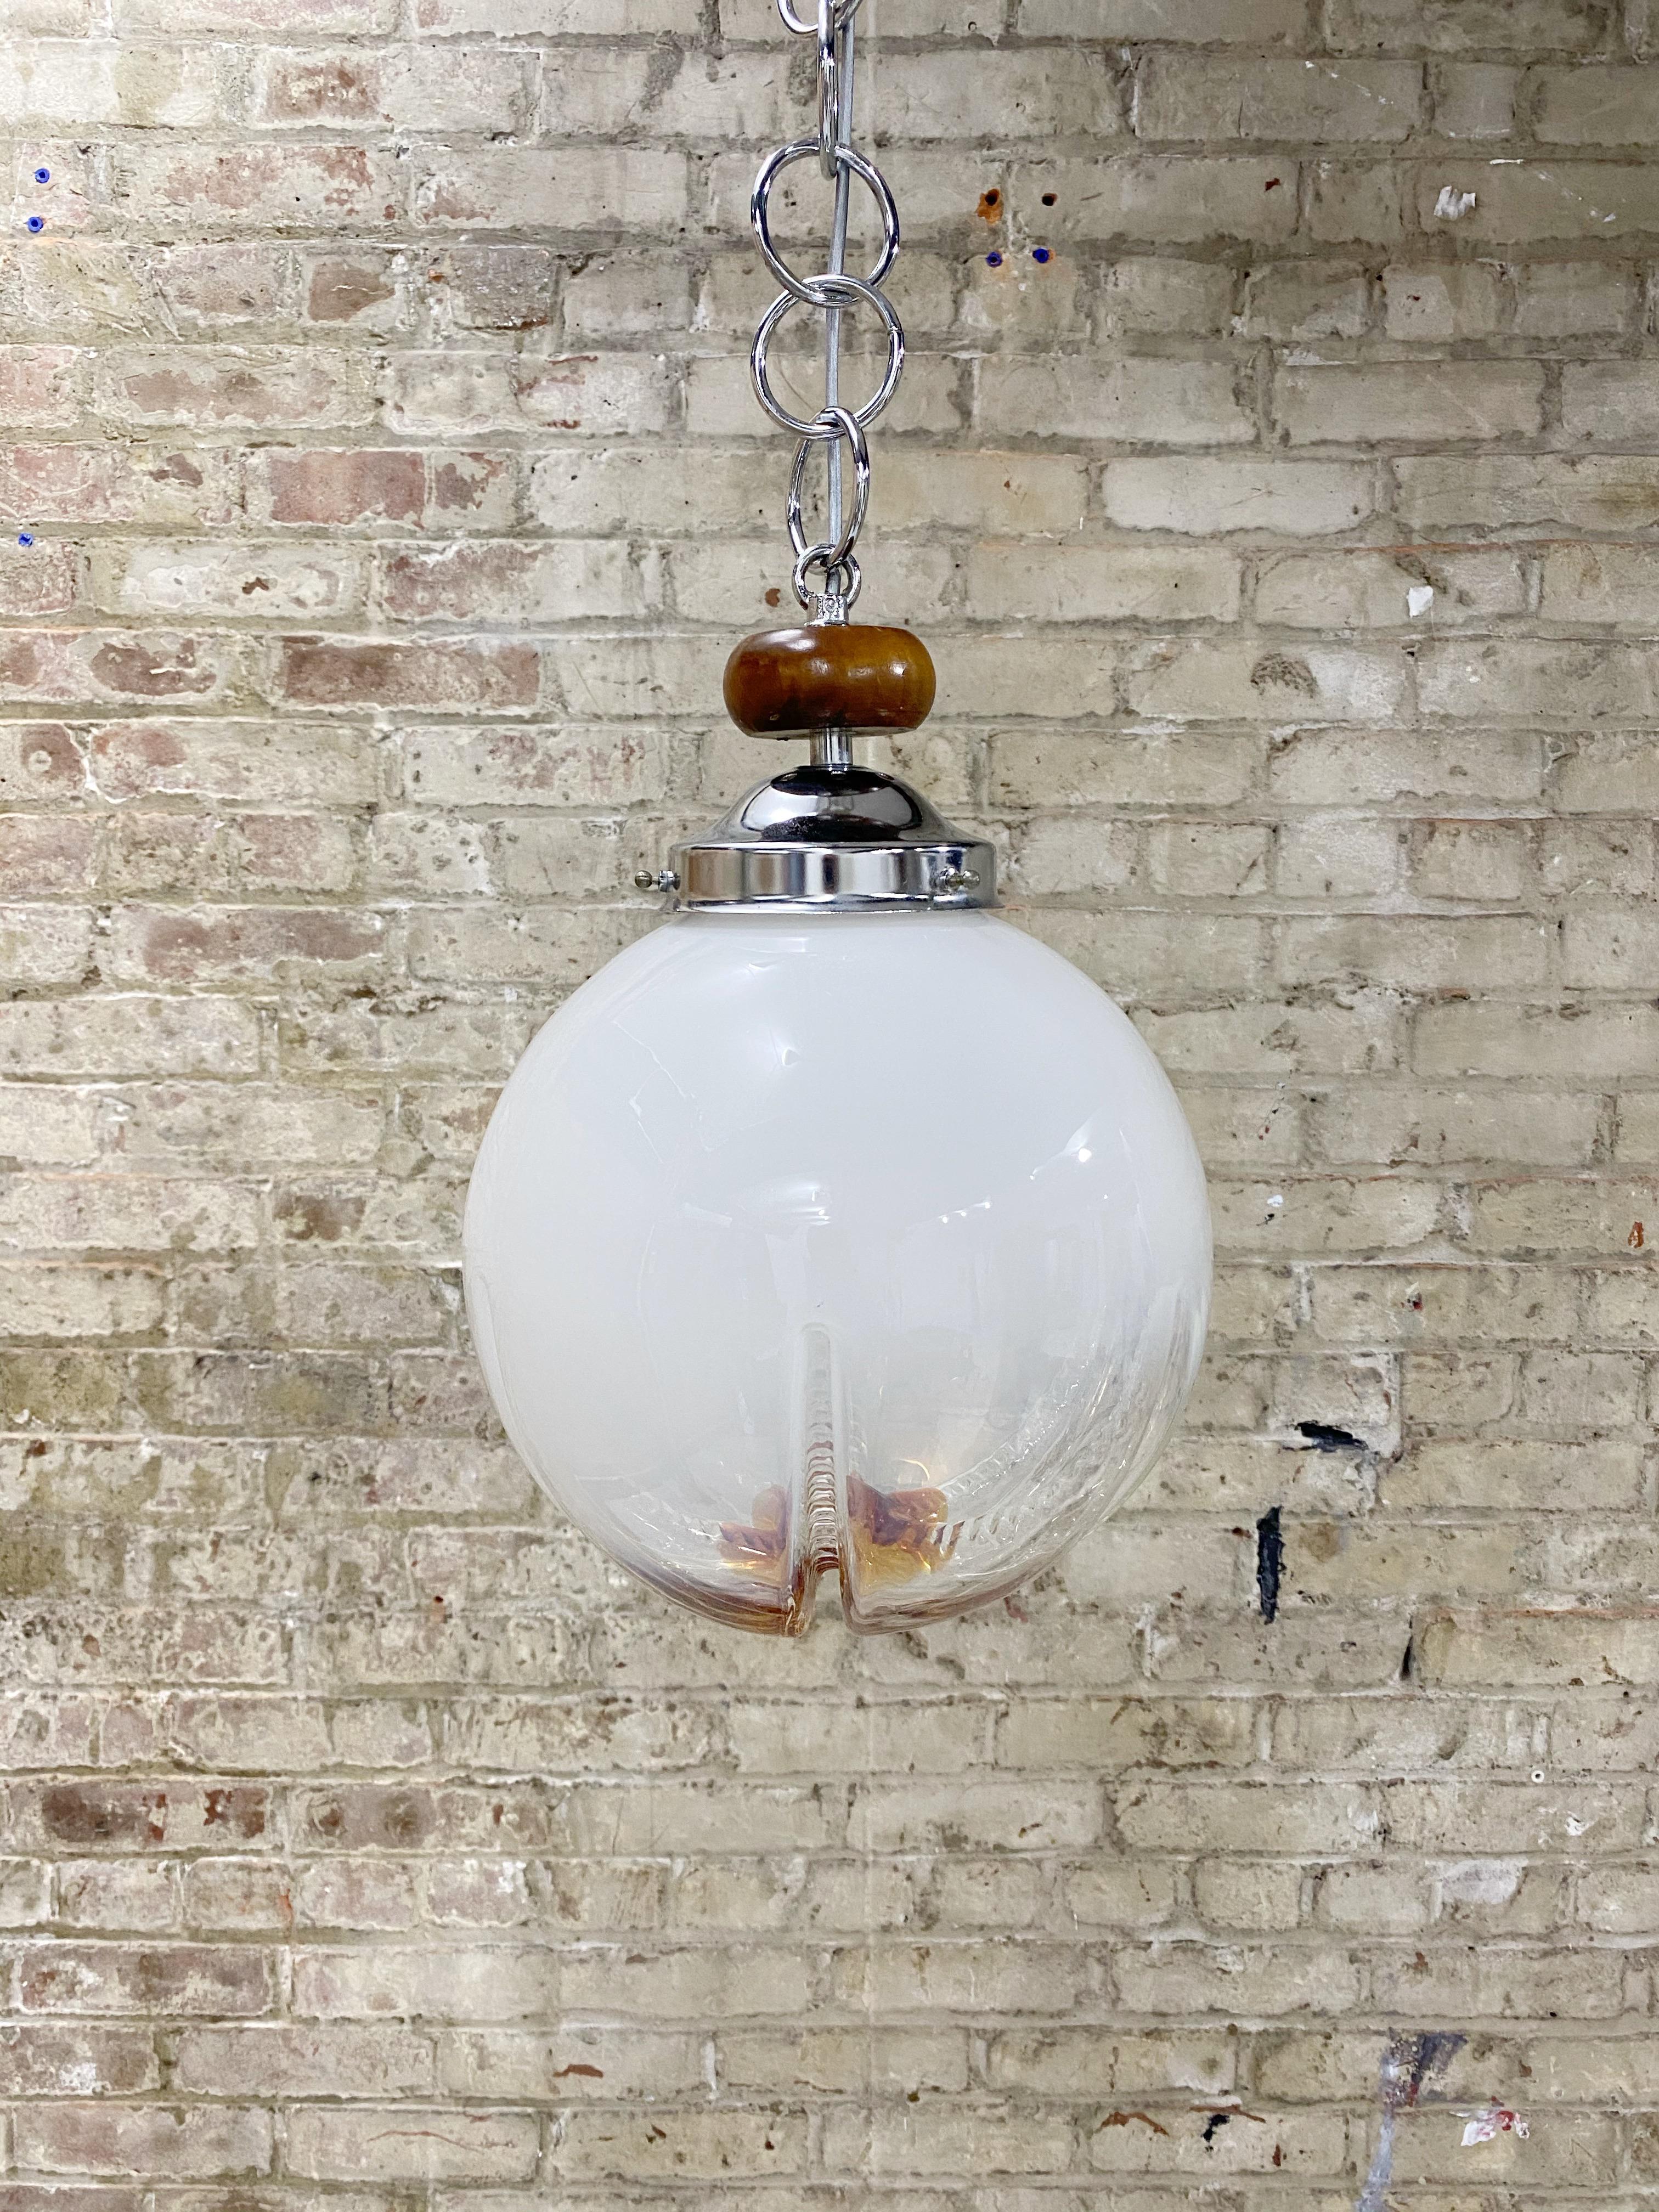 Fabulous Mazzega Murano globe pendant light. Milky colored glass with ombré effect to orange amber color. Globe shape with abstract blown glass effect. Wood detail. Full circle chain links, 16” long. Includes ceiling canopy. Professionally rewired